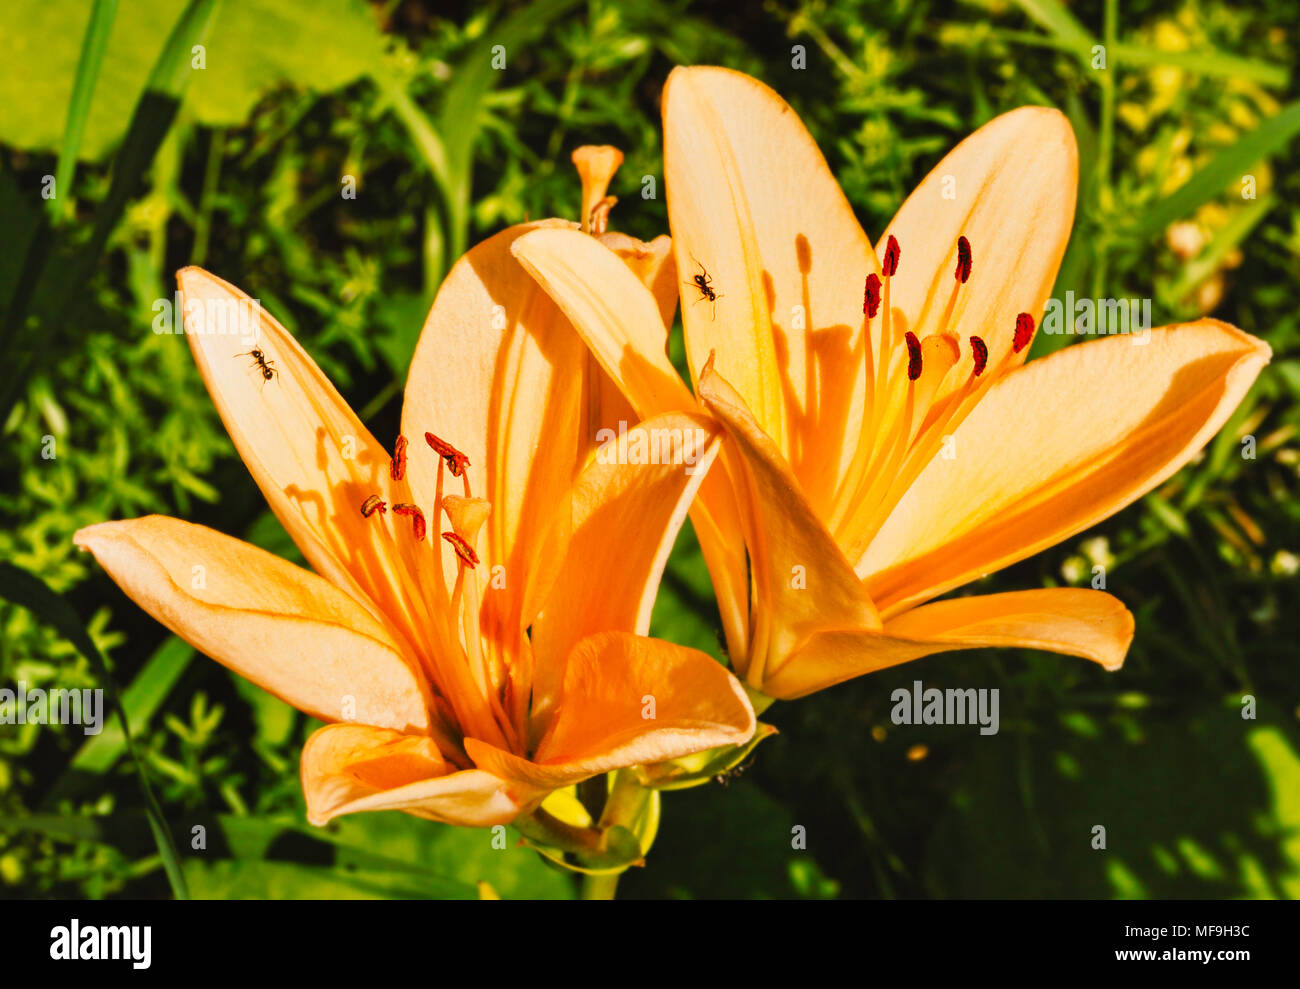 Great orange garden lilies at sunny summer weather Stock Photo